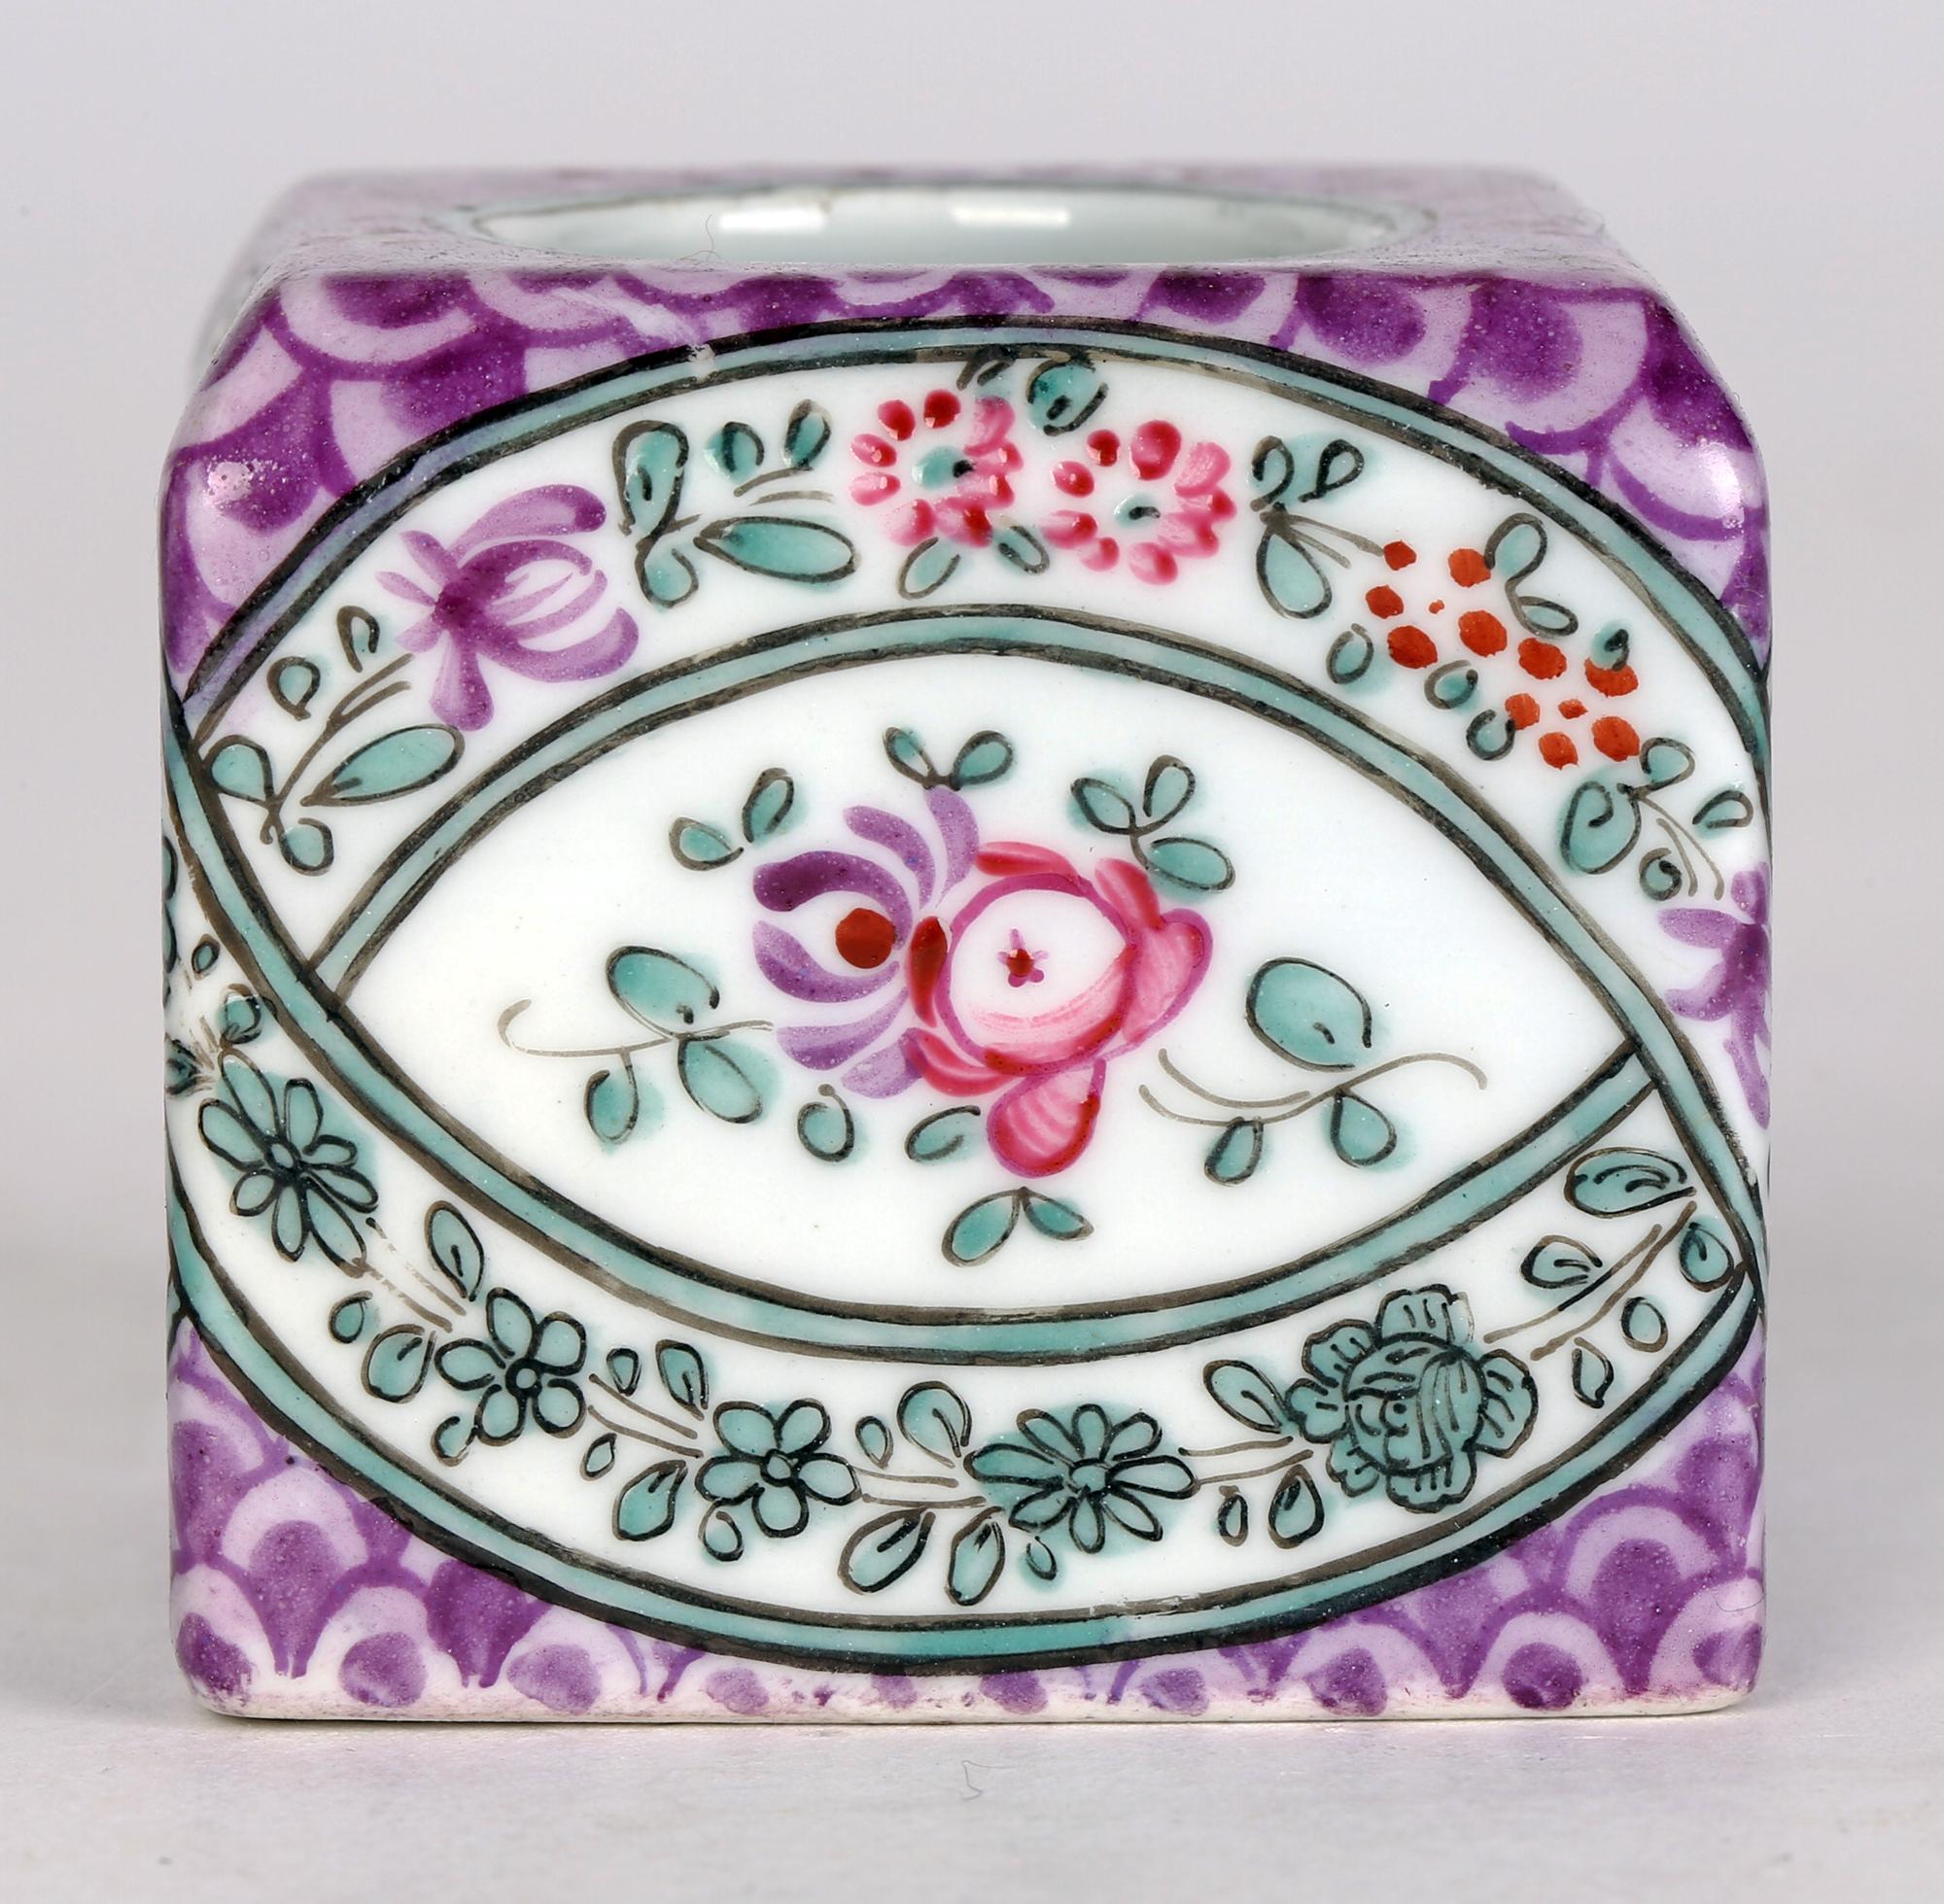 A very finely made antique French Paris porcelain inkwell made in the Chinese style by Edmé Samson (French, 1810-1891) and dating from the latter 19th century. The inkwell is of small cube form with a rounded opening to the top and would probably